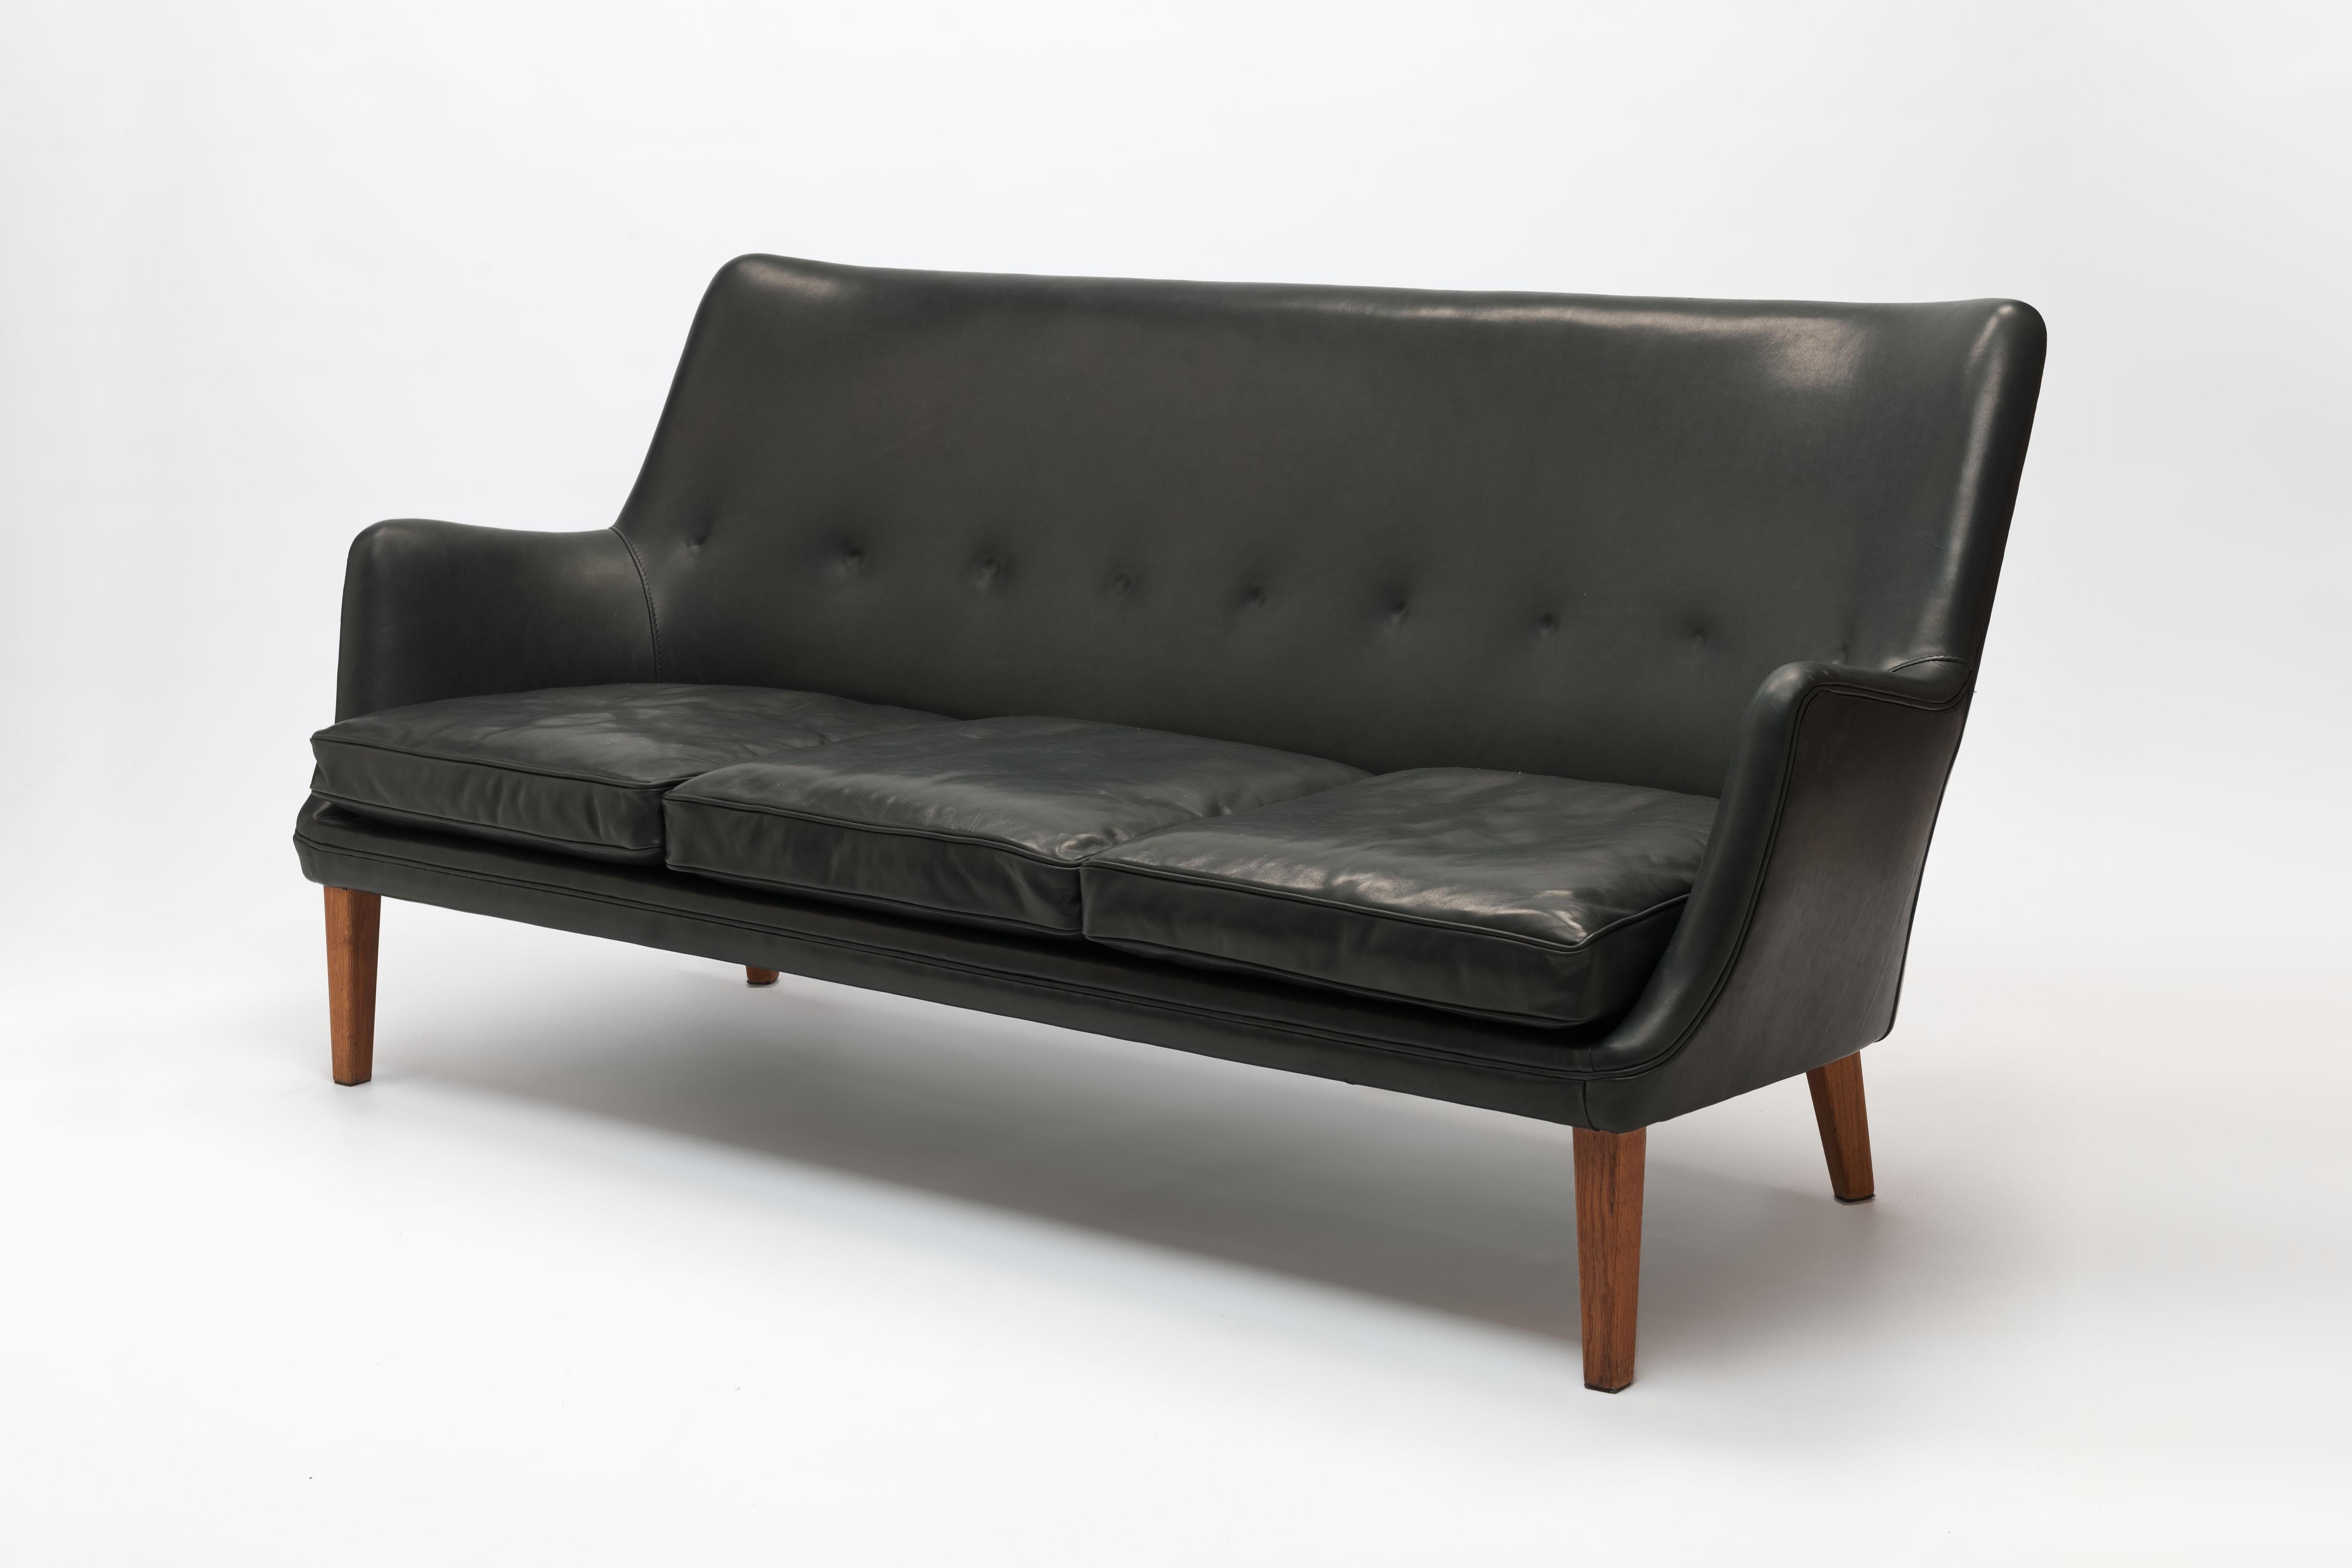 Refined black leather 3-seat sofa model AV53 / 3 by Danish designer Arne Vodder, designed in 1953 for Ivan Schlechter, Denmark. This beautiful organic design is characterized by the special way in which the back is 'tufted', not with buttons from